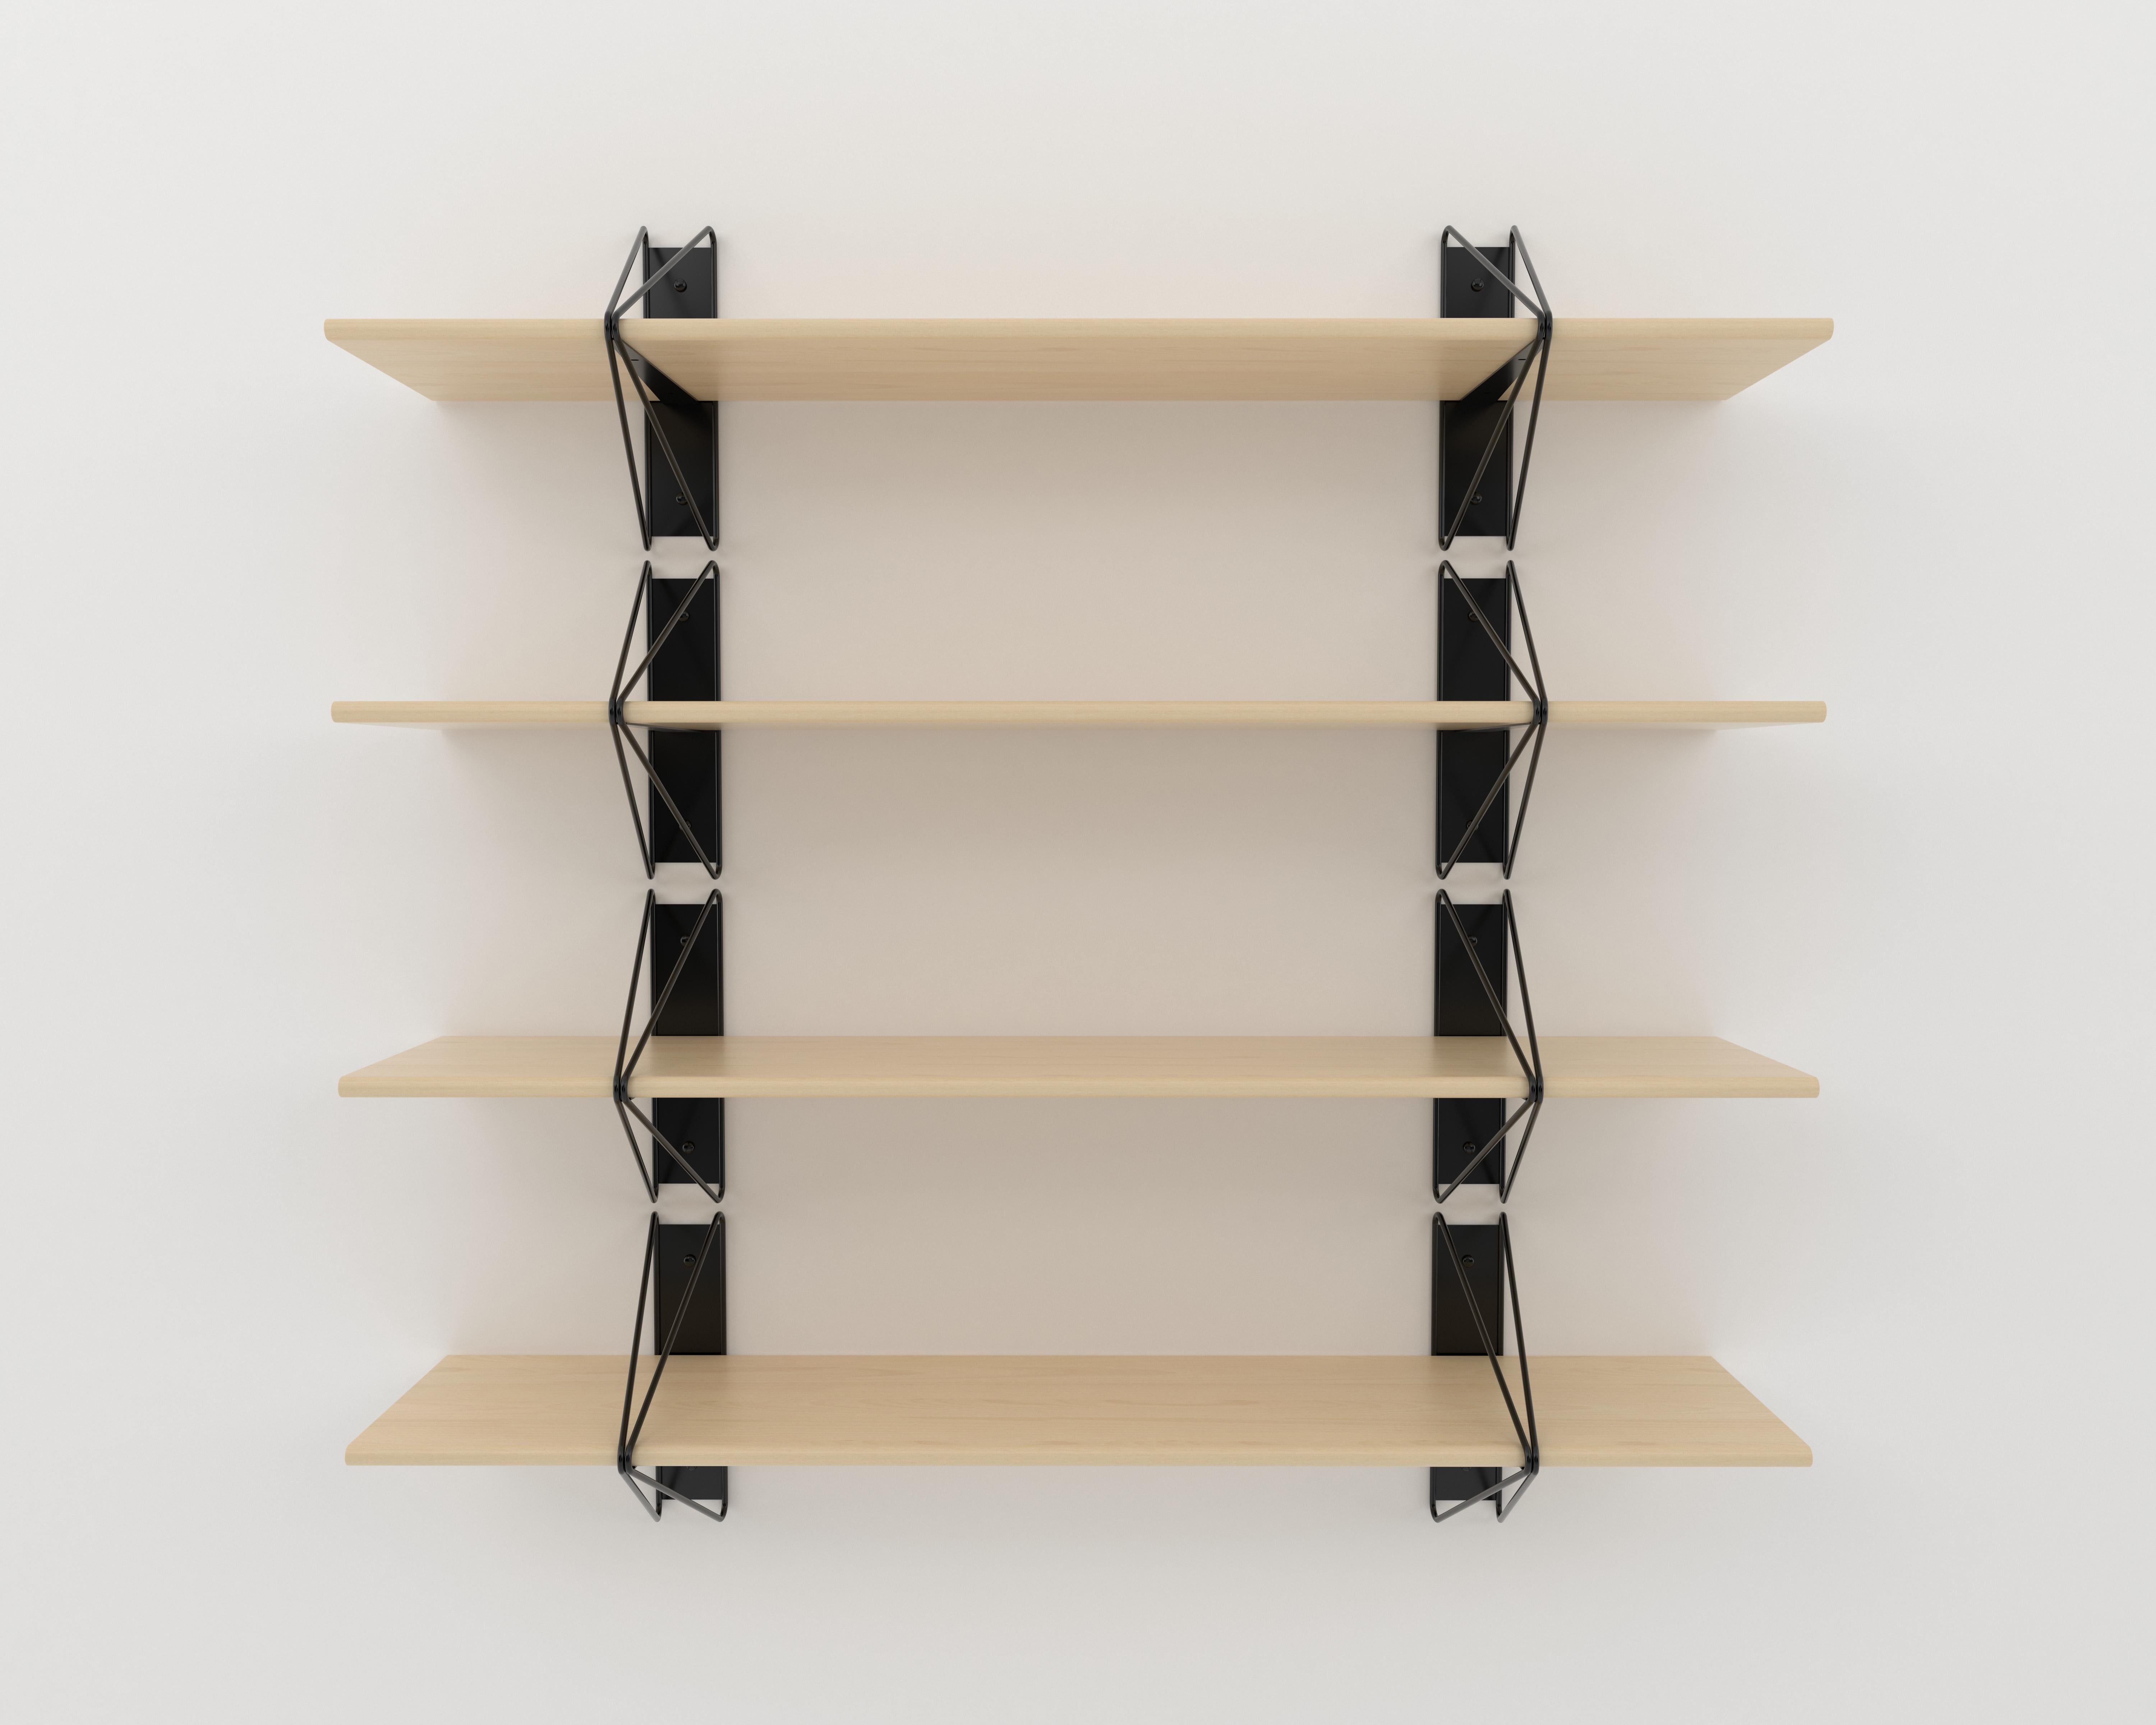 American Set of 3 Strut Shelves from Souda, 52in, Black and Walnut, Made to Order For Sale